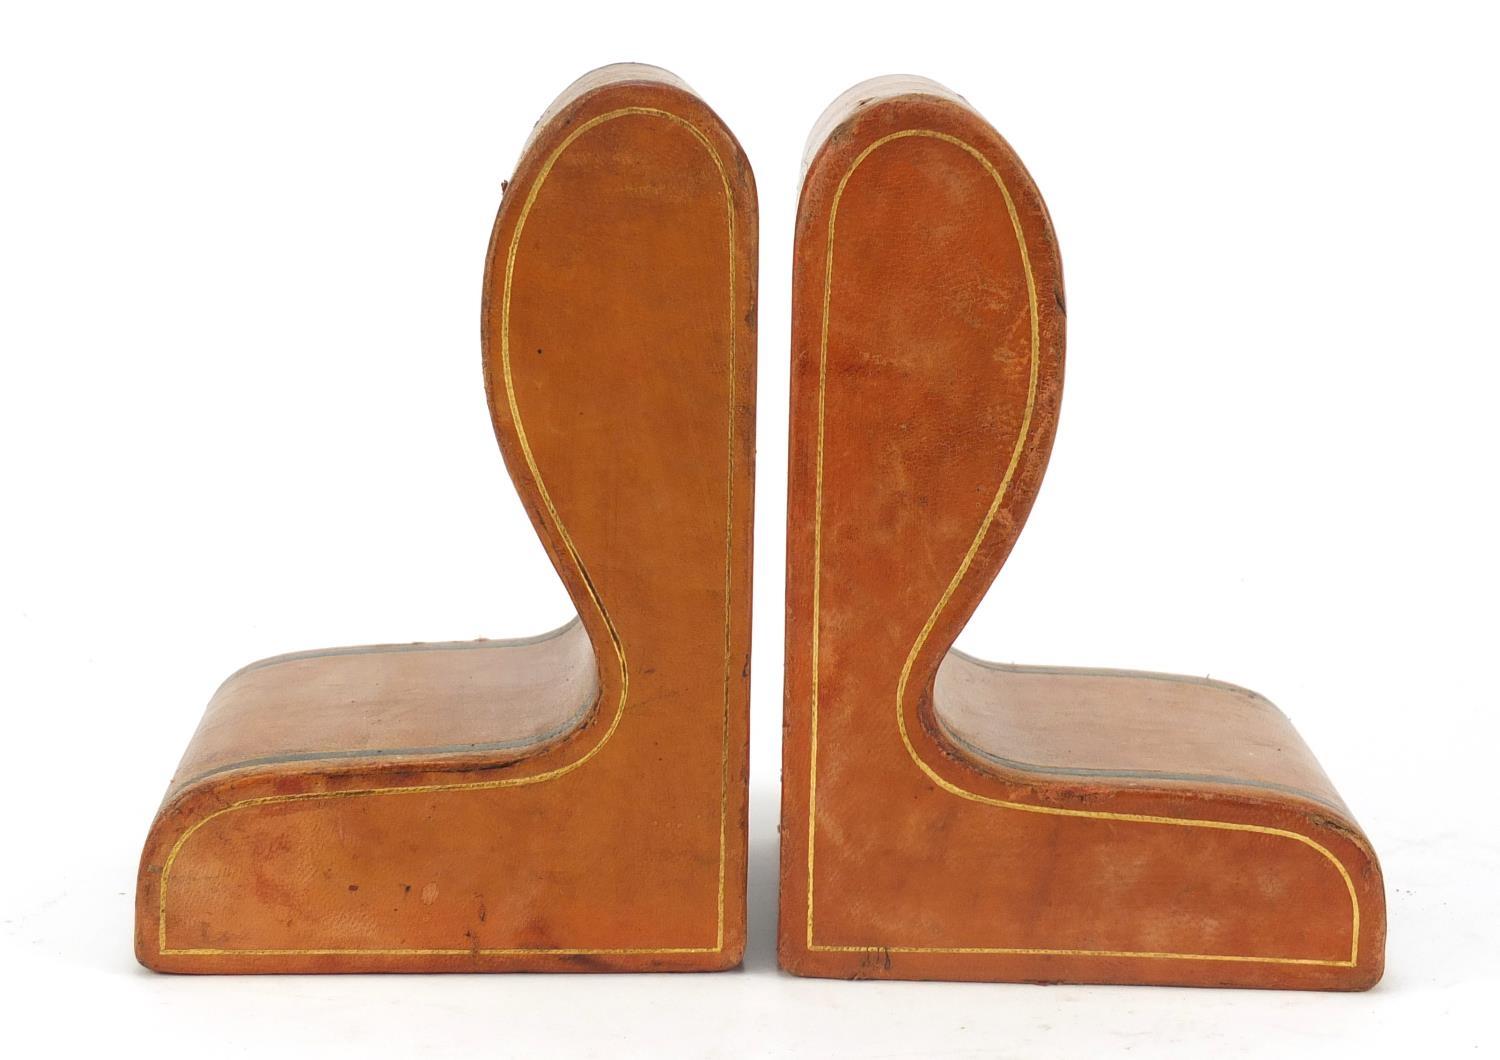 Pair of Italian tooled leather book ends with embossed crests, retailed by Harrods, each 17cm high : - Image 5 of 9